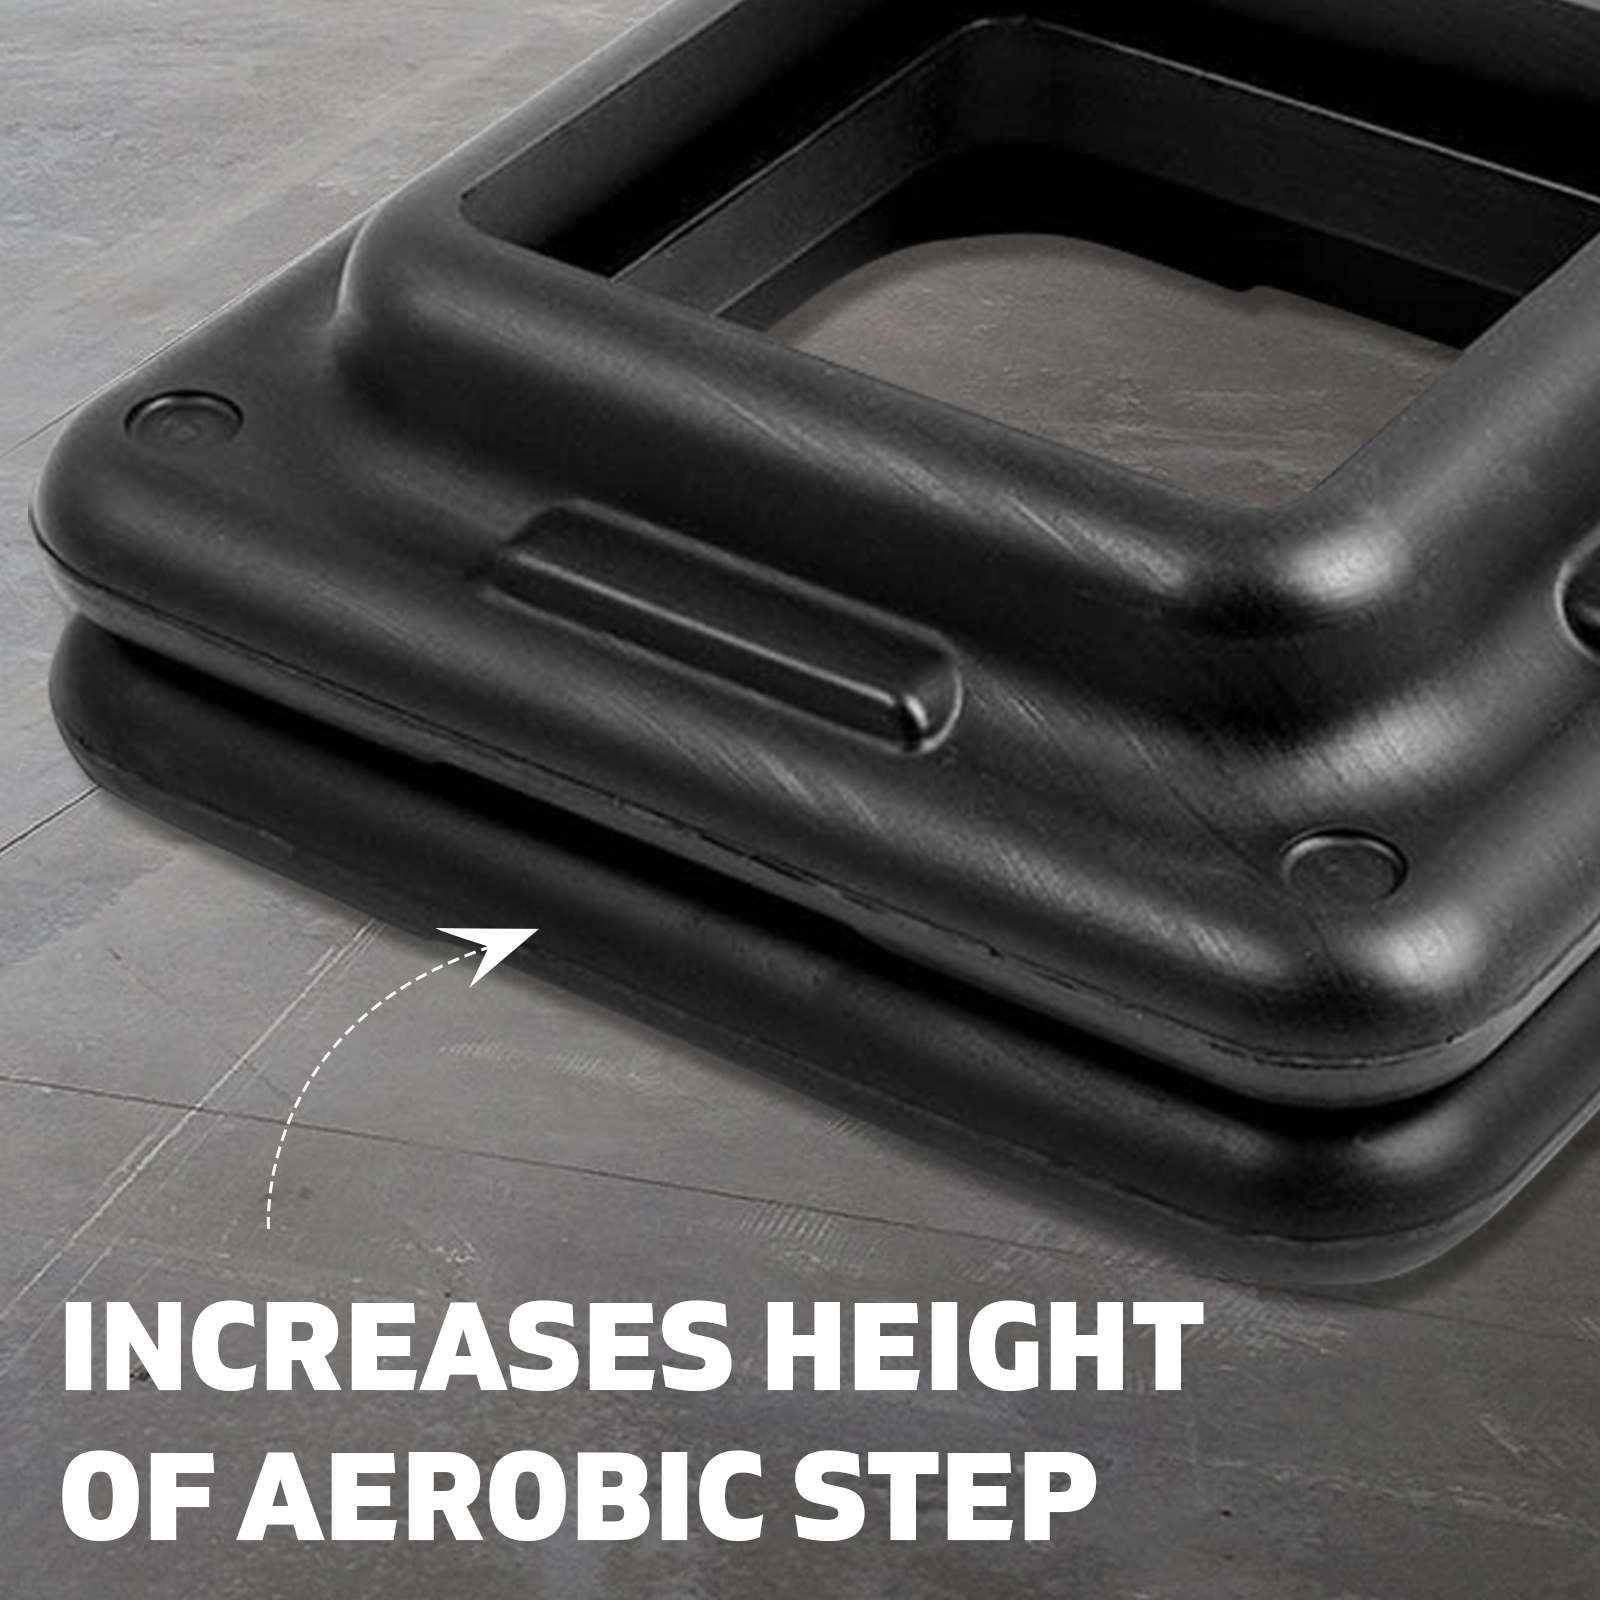 Areobic Step Bench Workout Exercise Step Risers 5cm Fitness Gym - Black